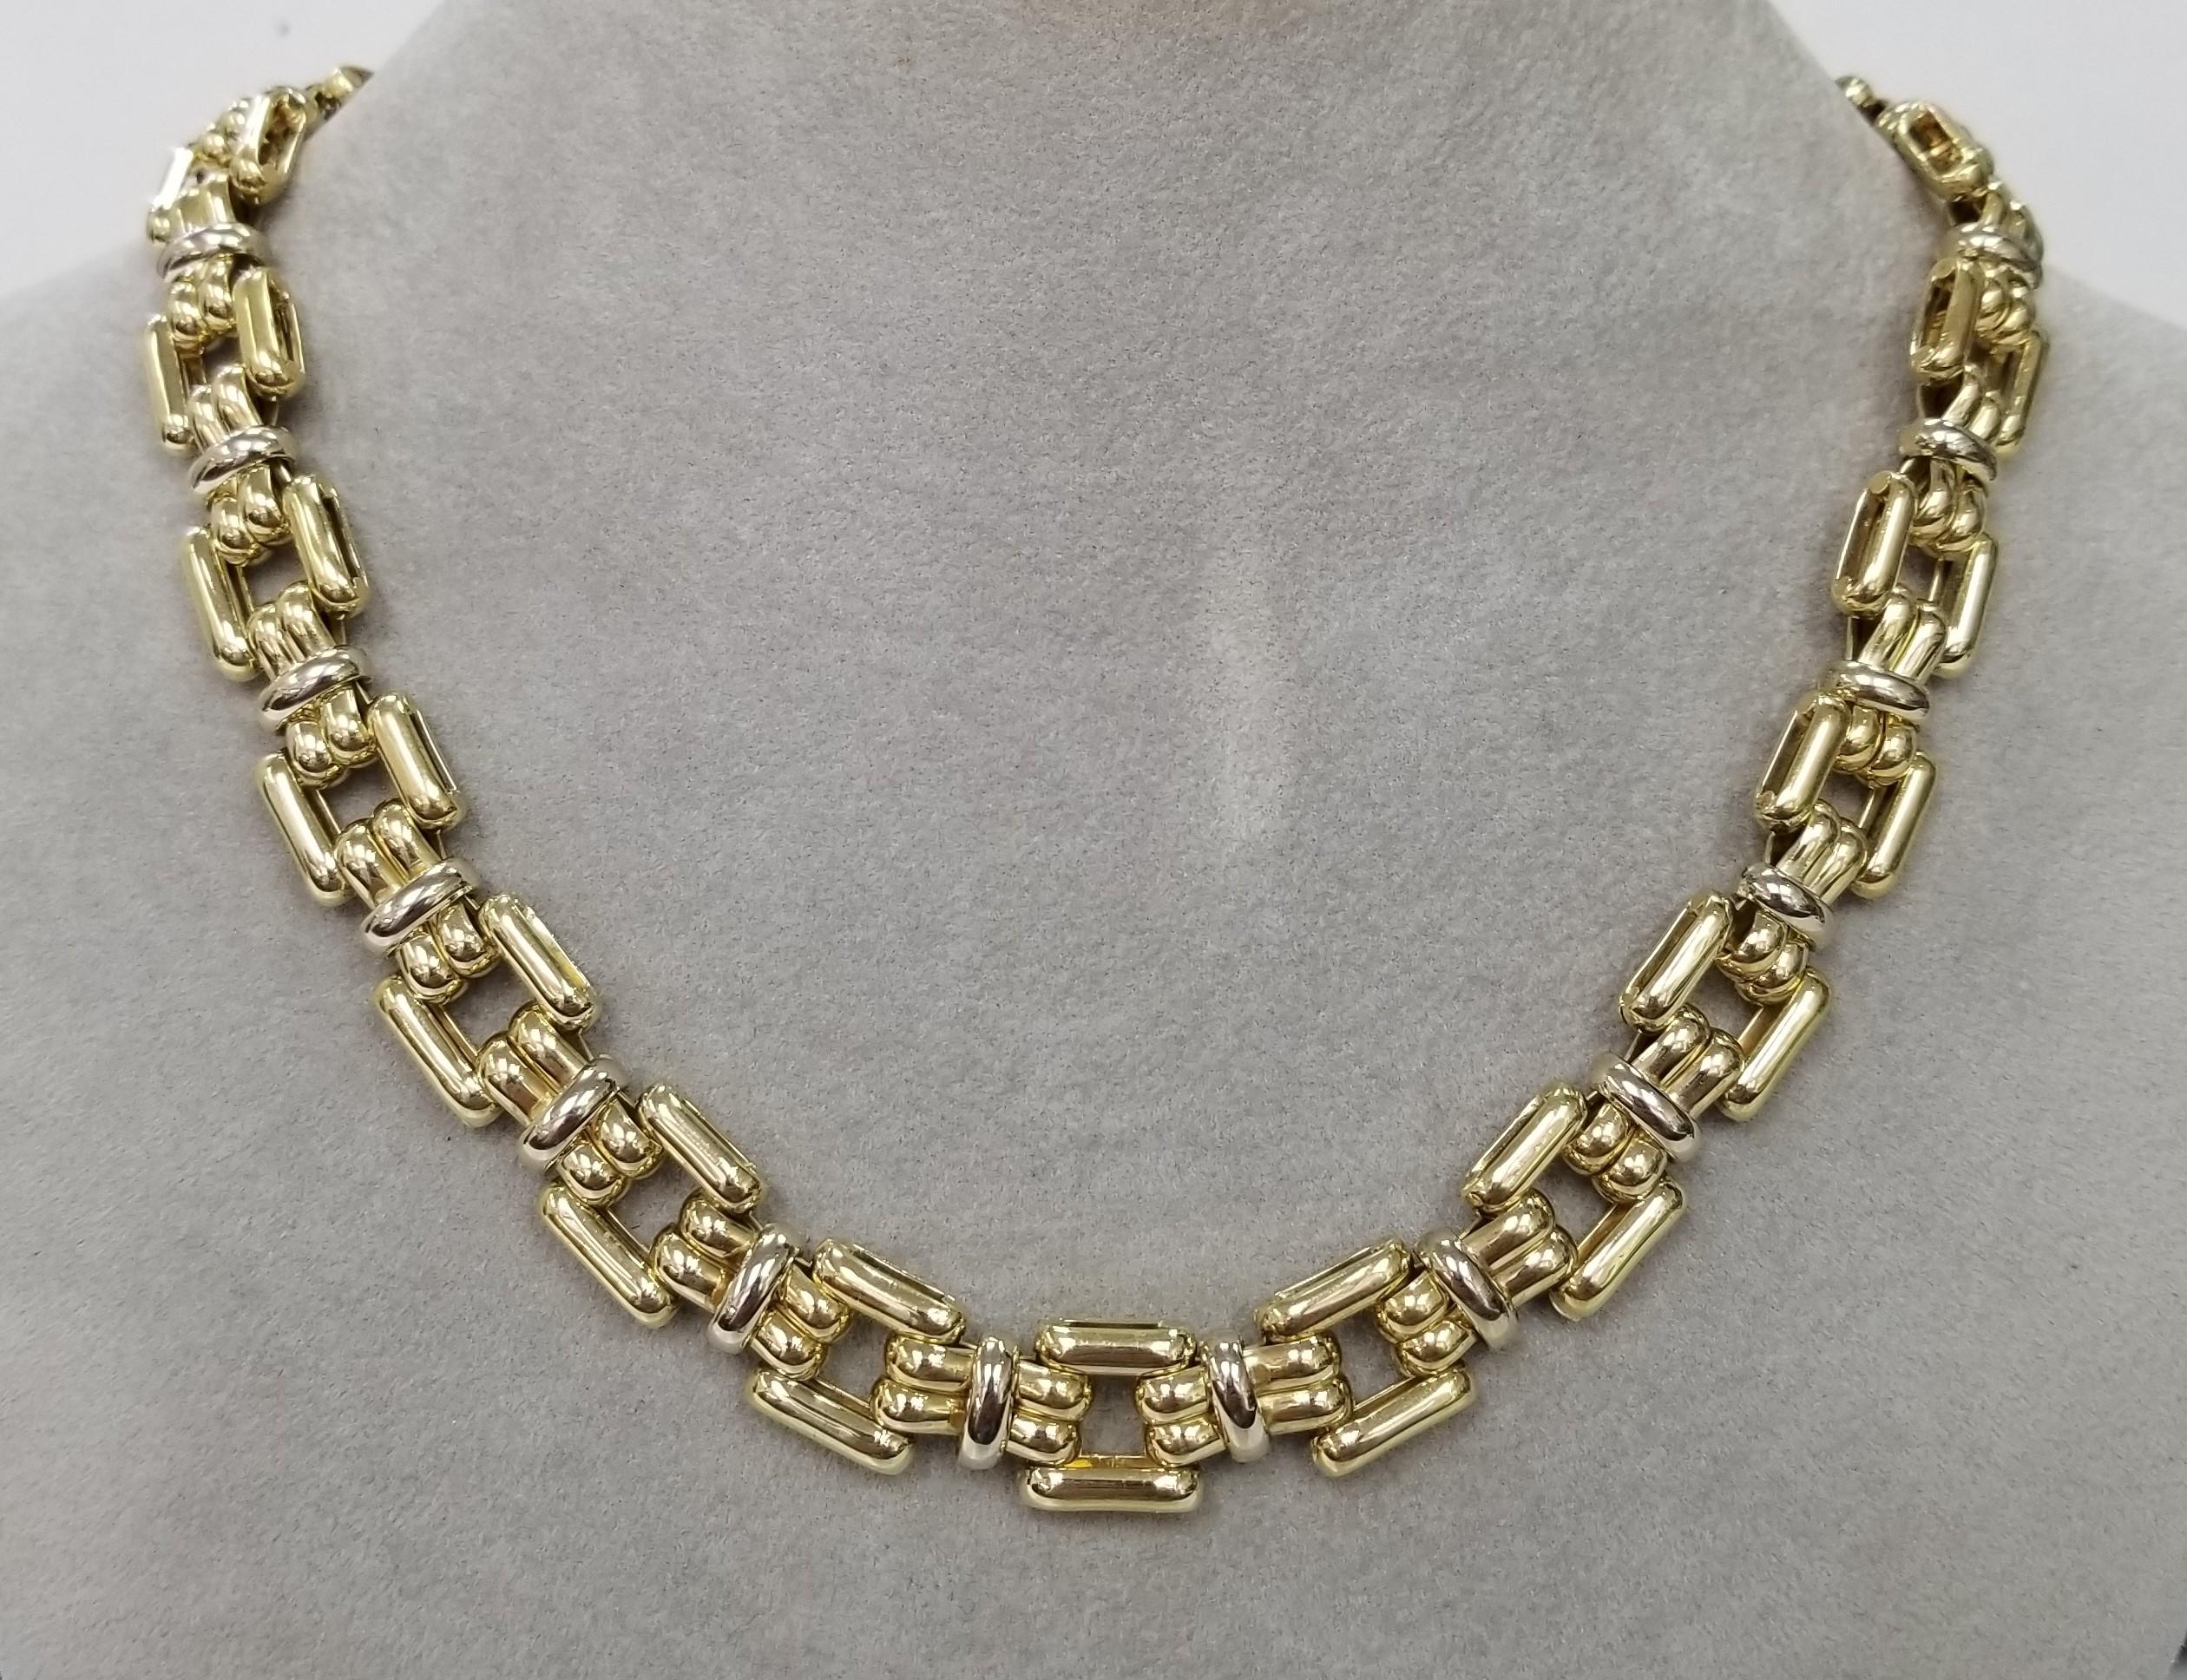 Specifications:
    TYPE:NECKLACE/ CHAIN
    METAL:18K HOLLOW GOLD
    WIDTH/THICKNESS:12.35 MM
    weight:63.86 GRS
    CHAIN LENGTH:16.75 INCHES


